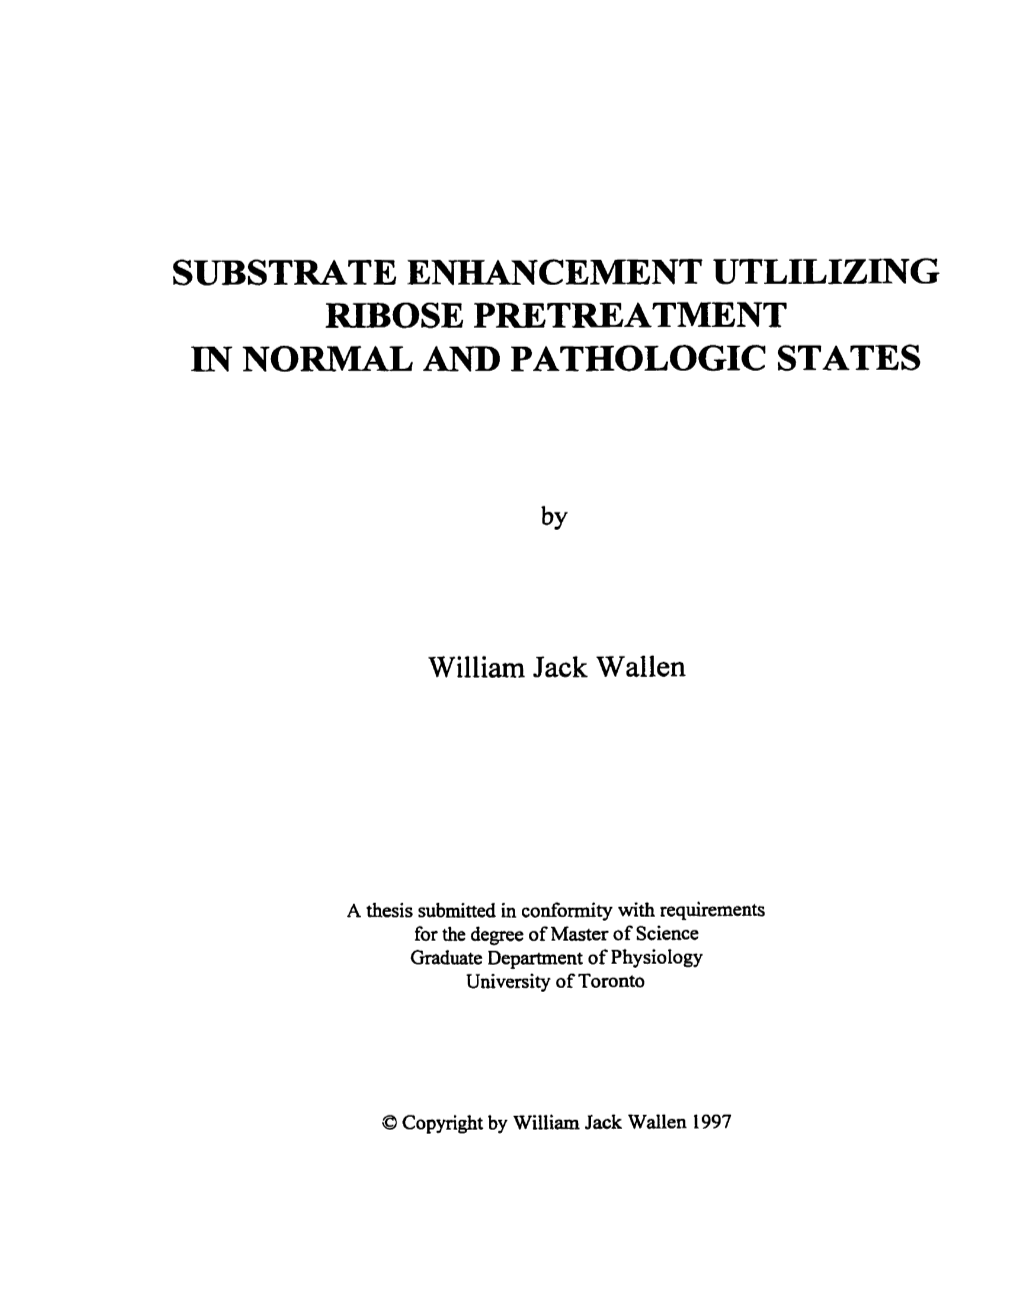 Substrate Enhancement Utlilizing Ribose Pretreatment in Normal and Pathologic States